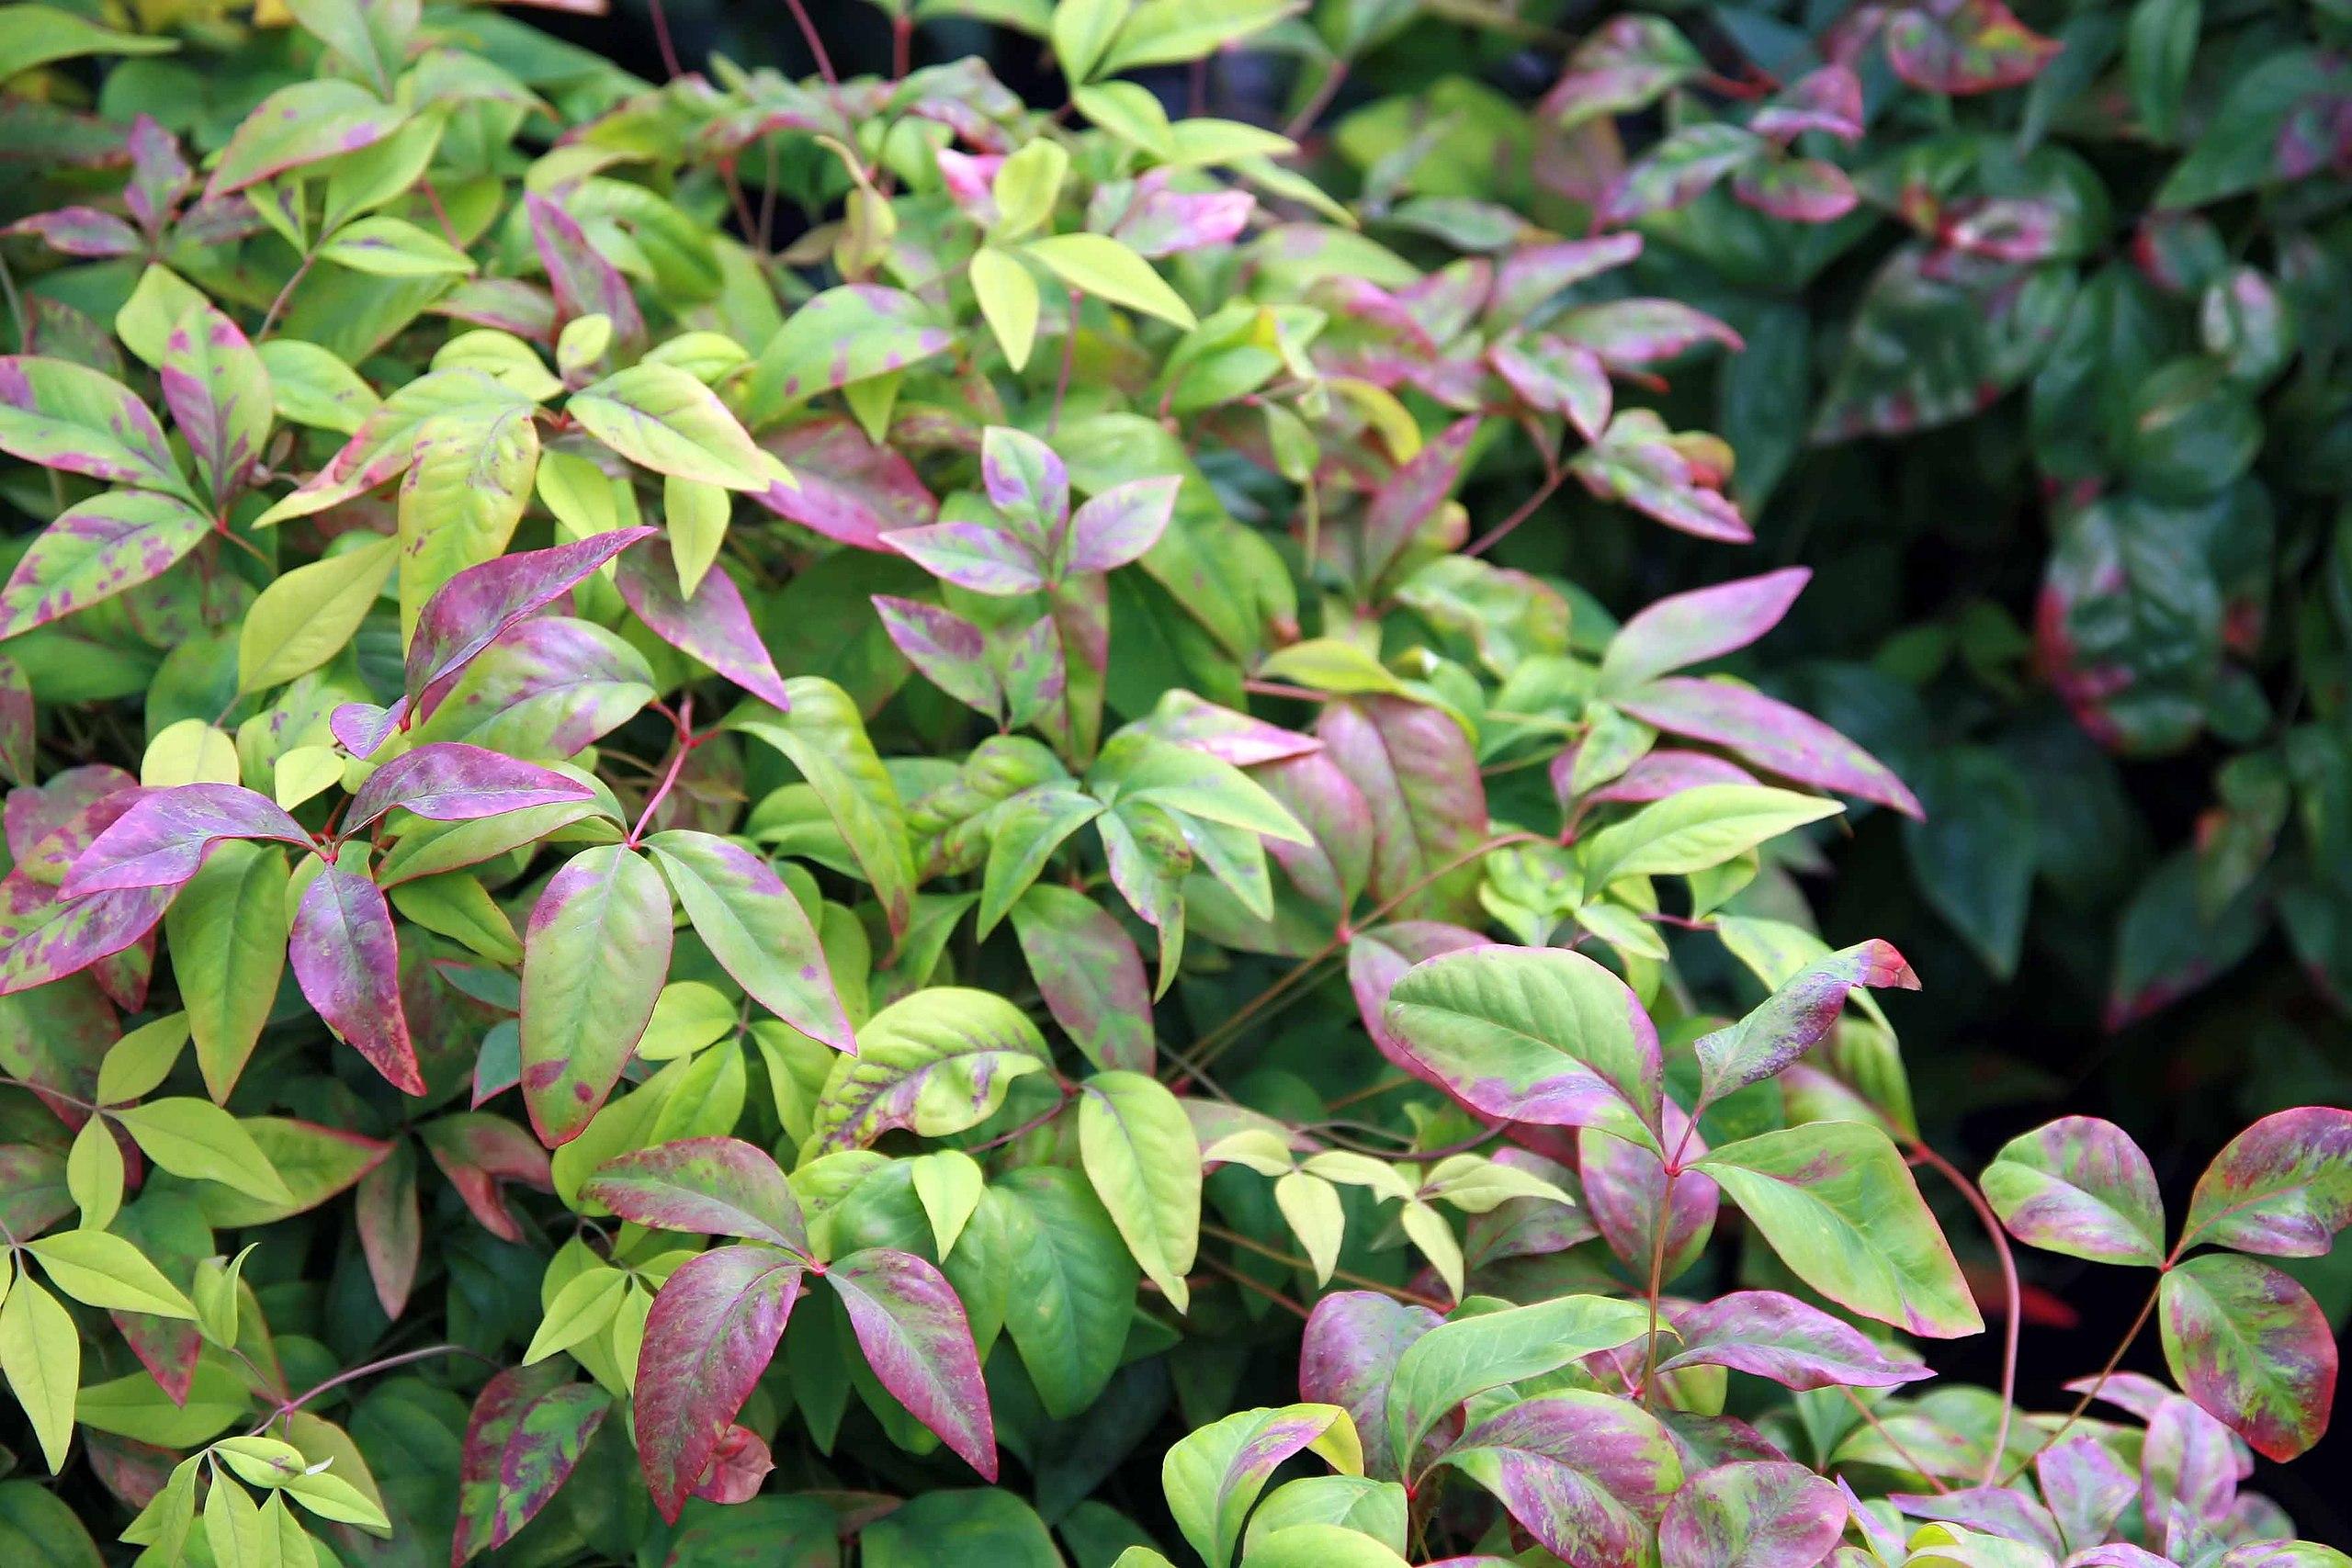 Green-red leaves with red petiole, midrib and stems